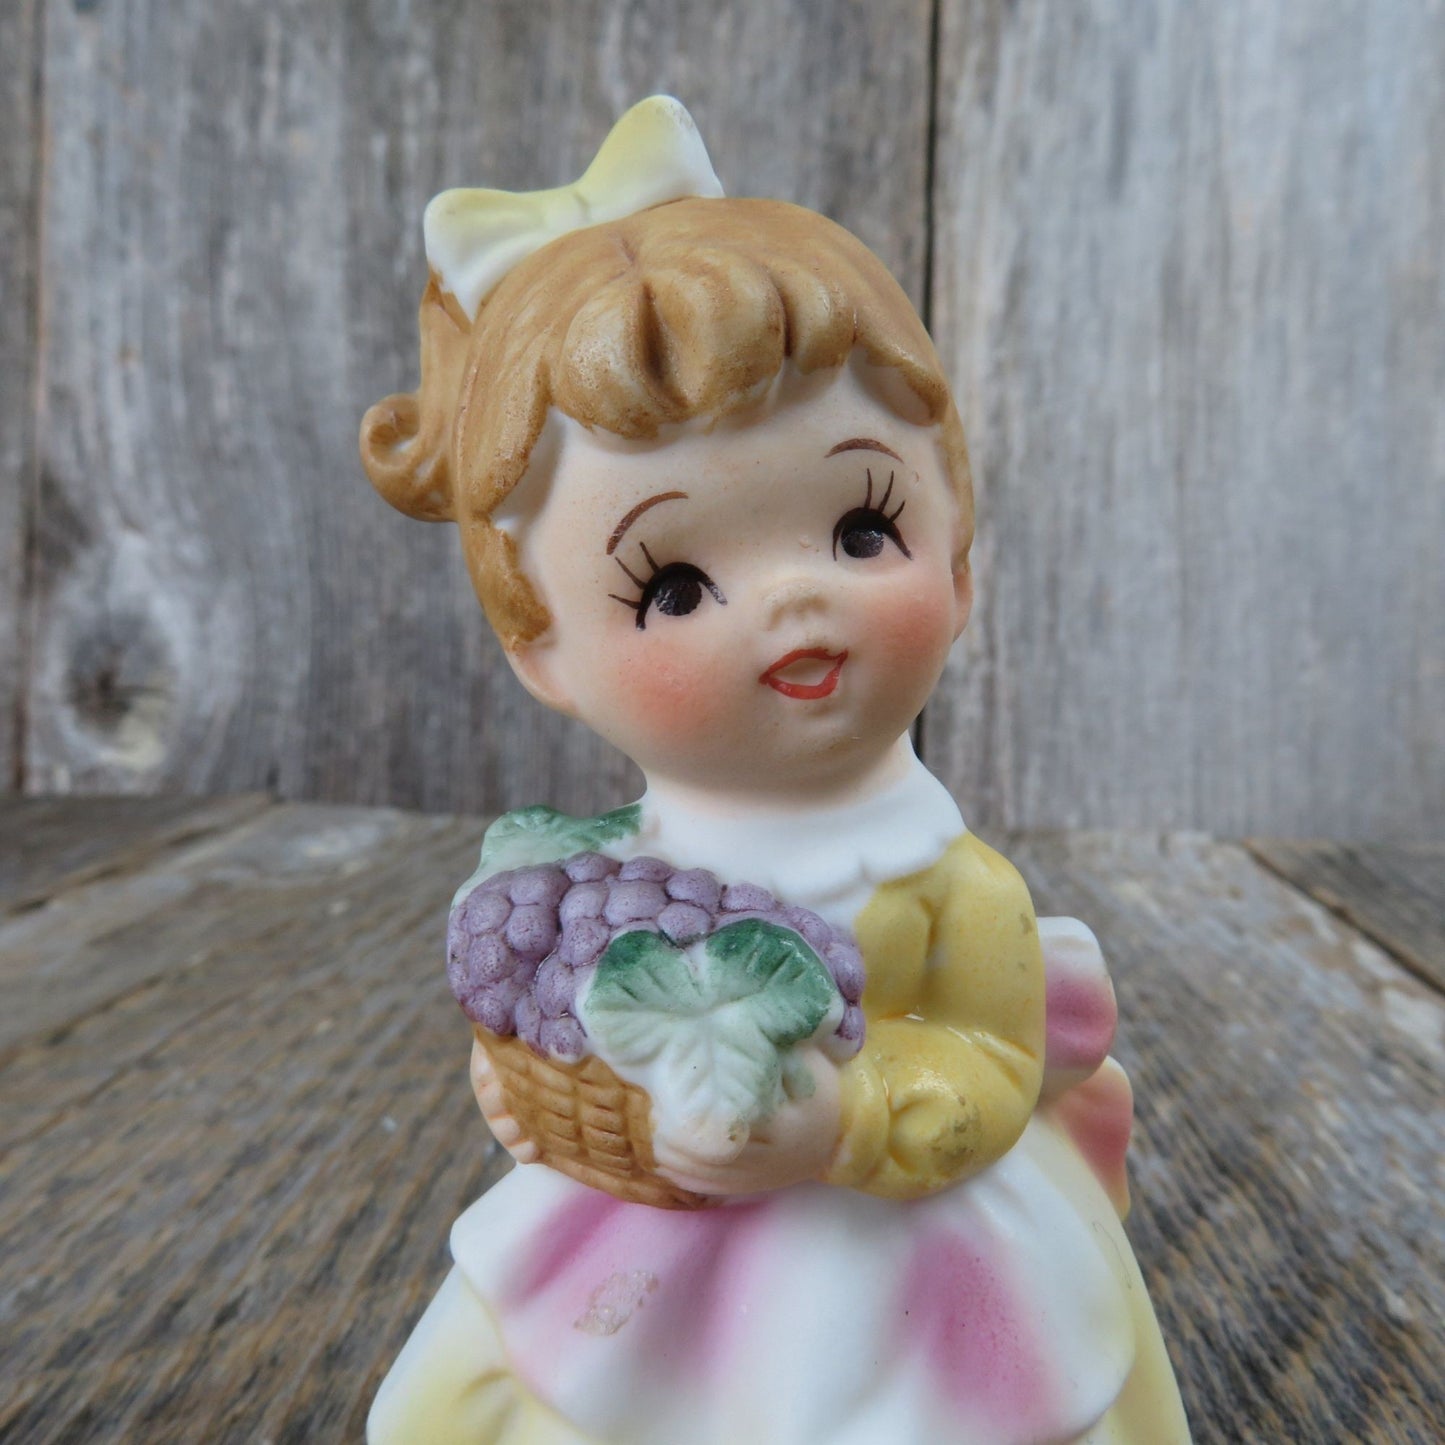 Vintage Girl with Grape Basket Figurine Enesco Red Blond Hair Yellow Dress Pink Apron